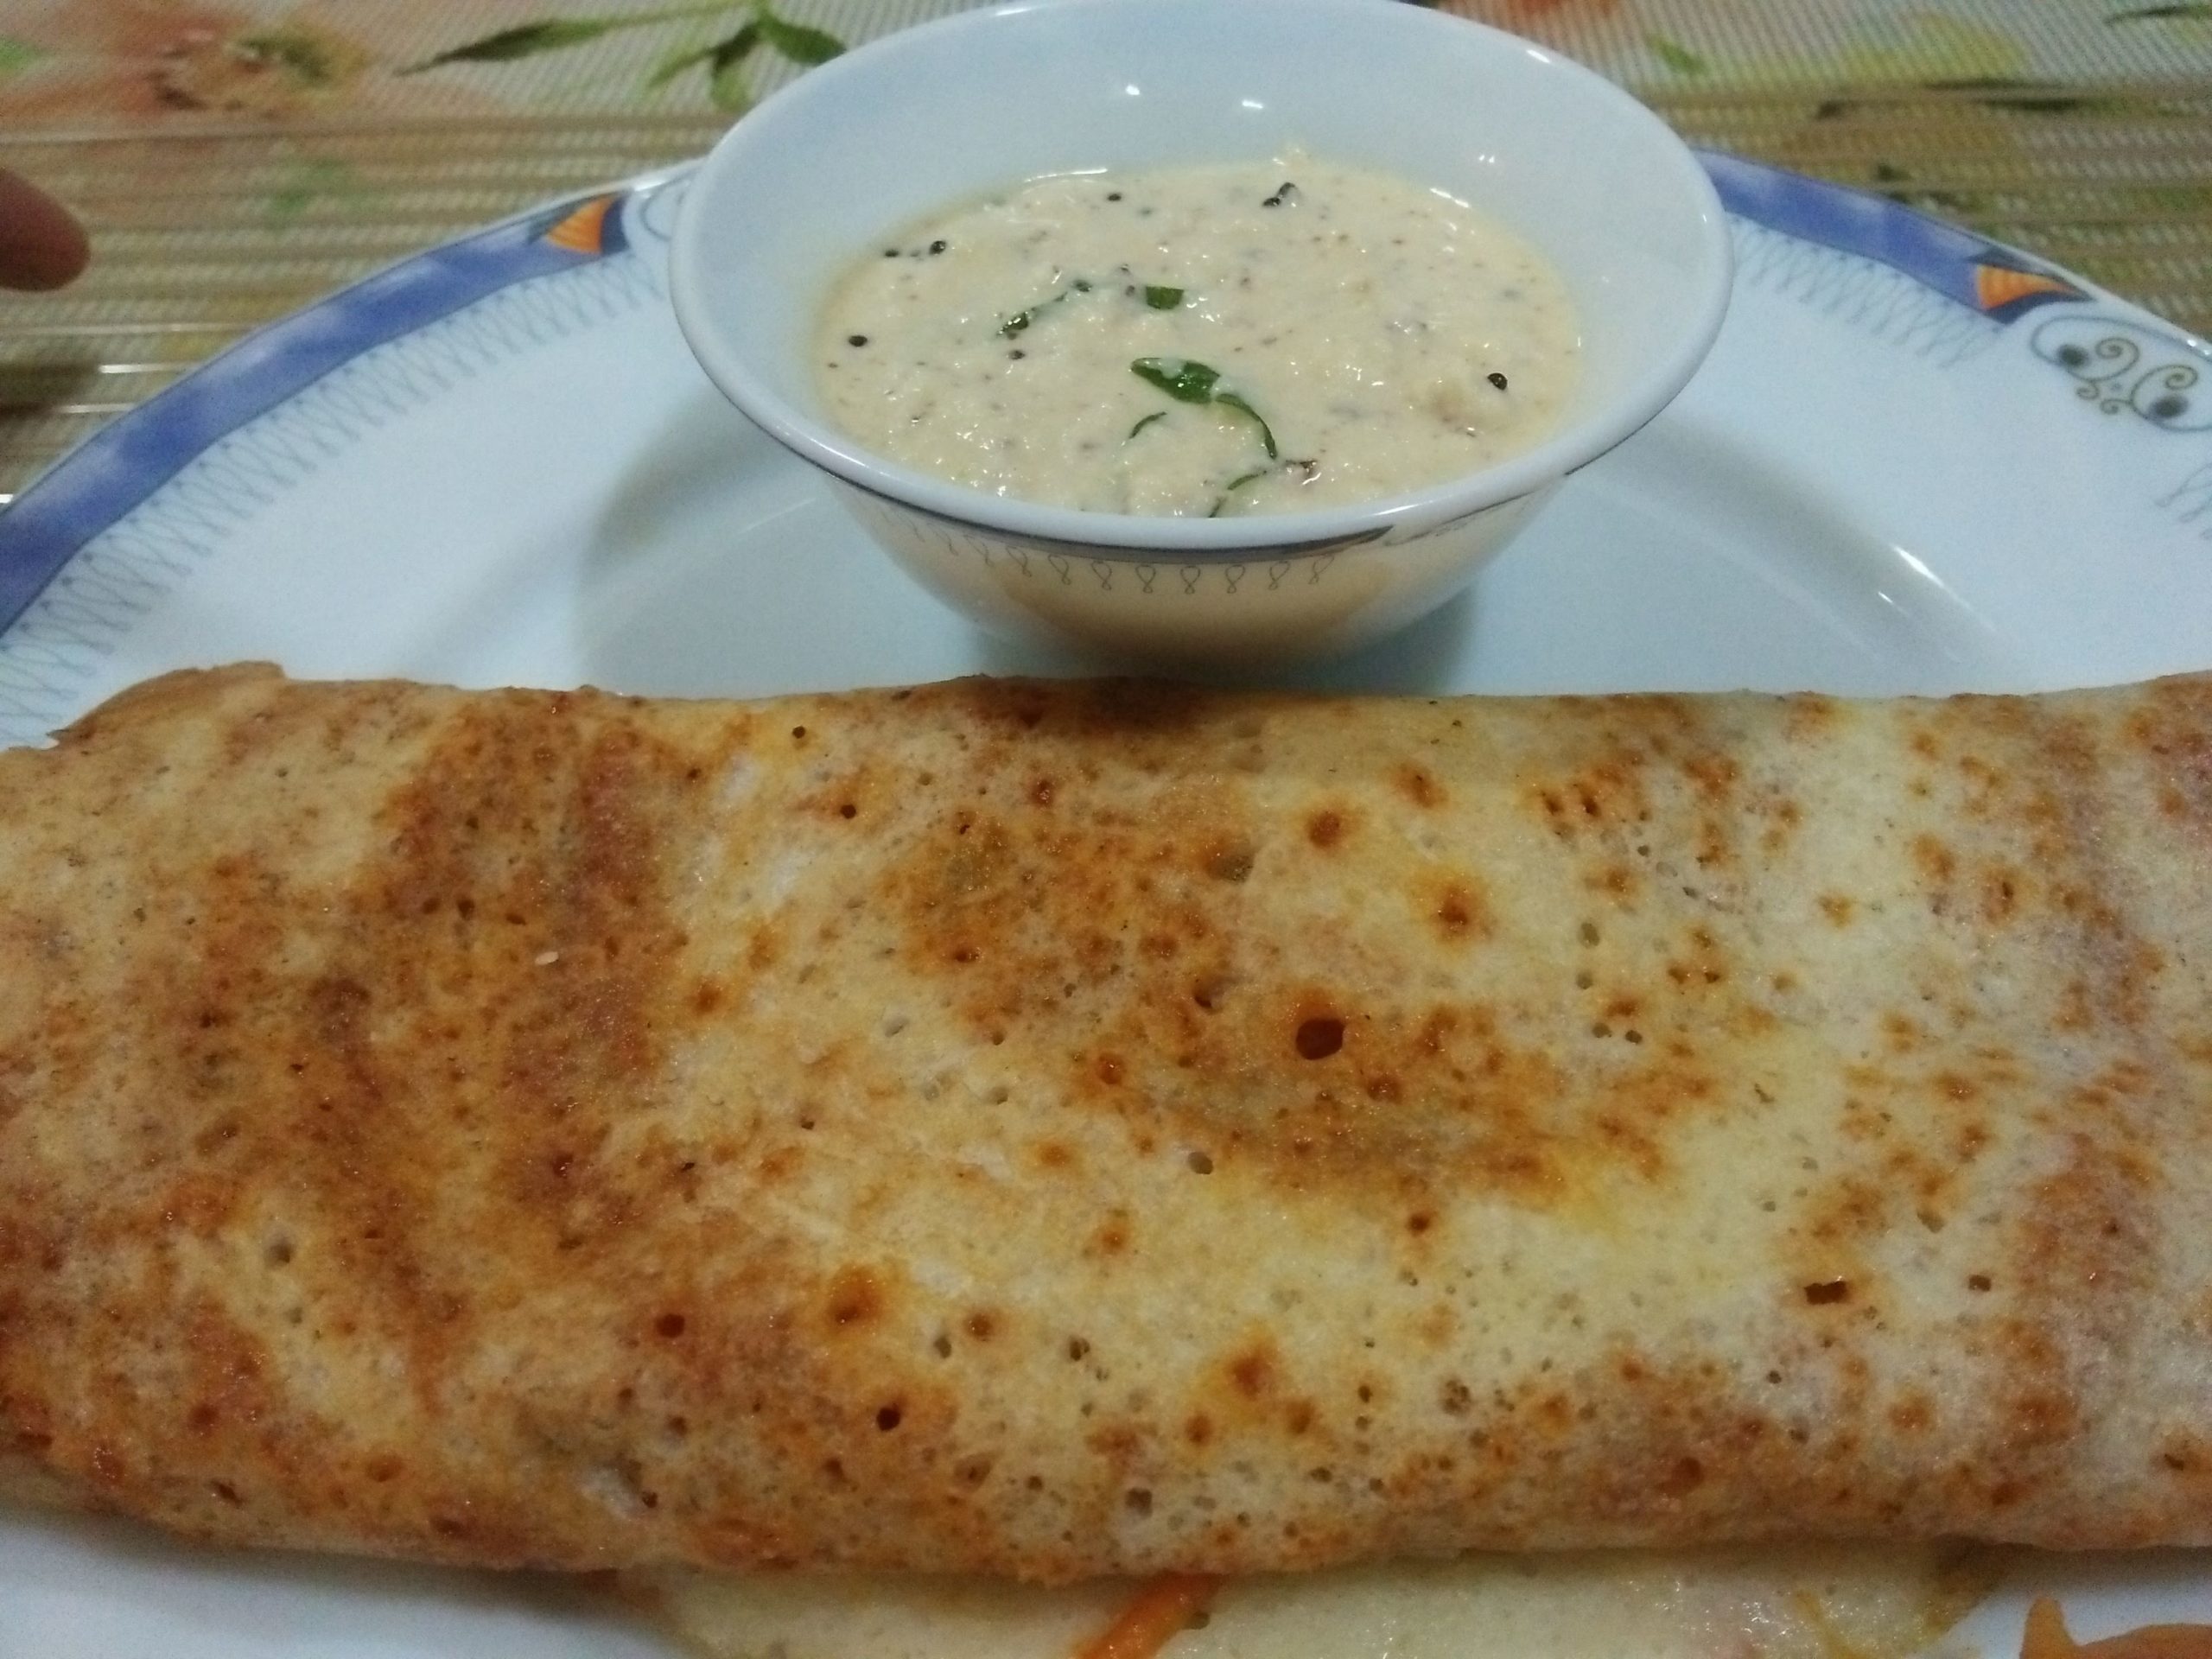 variant of Dosa served with chutney